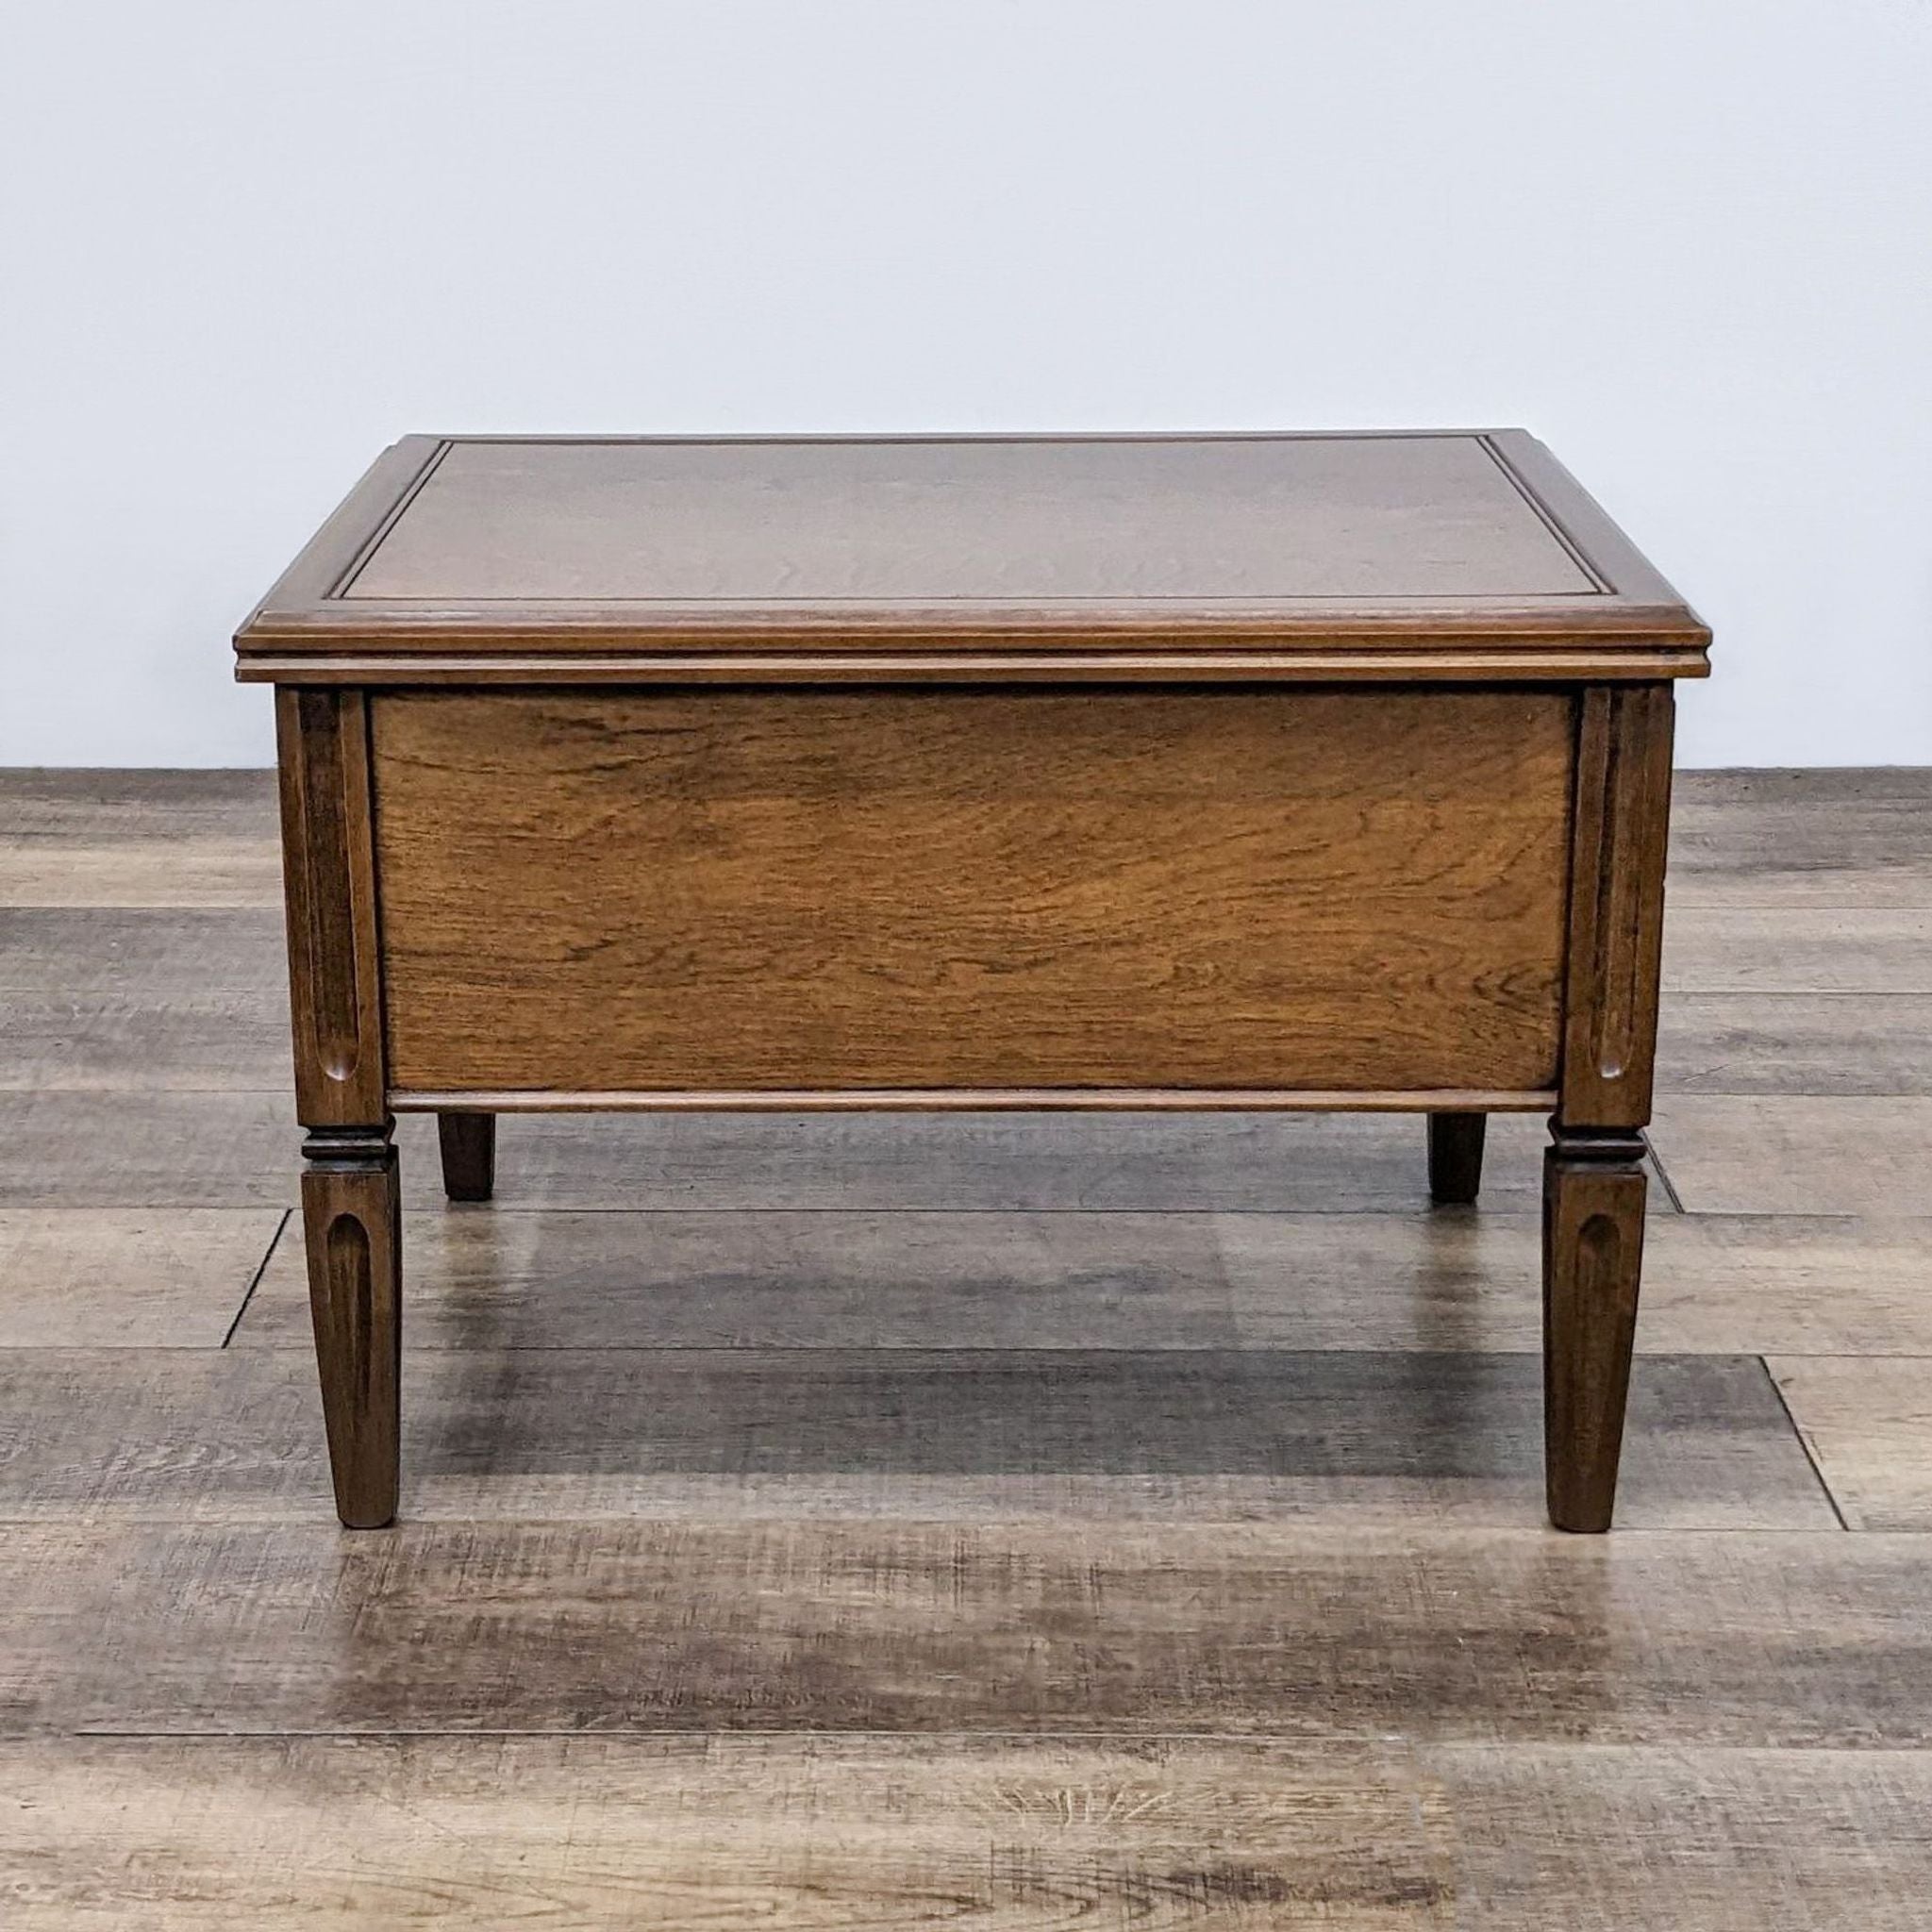 Reperch wooden end table with warm finish, classic design, detailed carvings, and two drawers with metal handles.